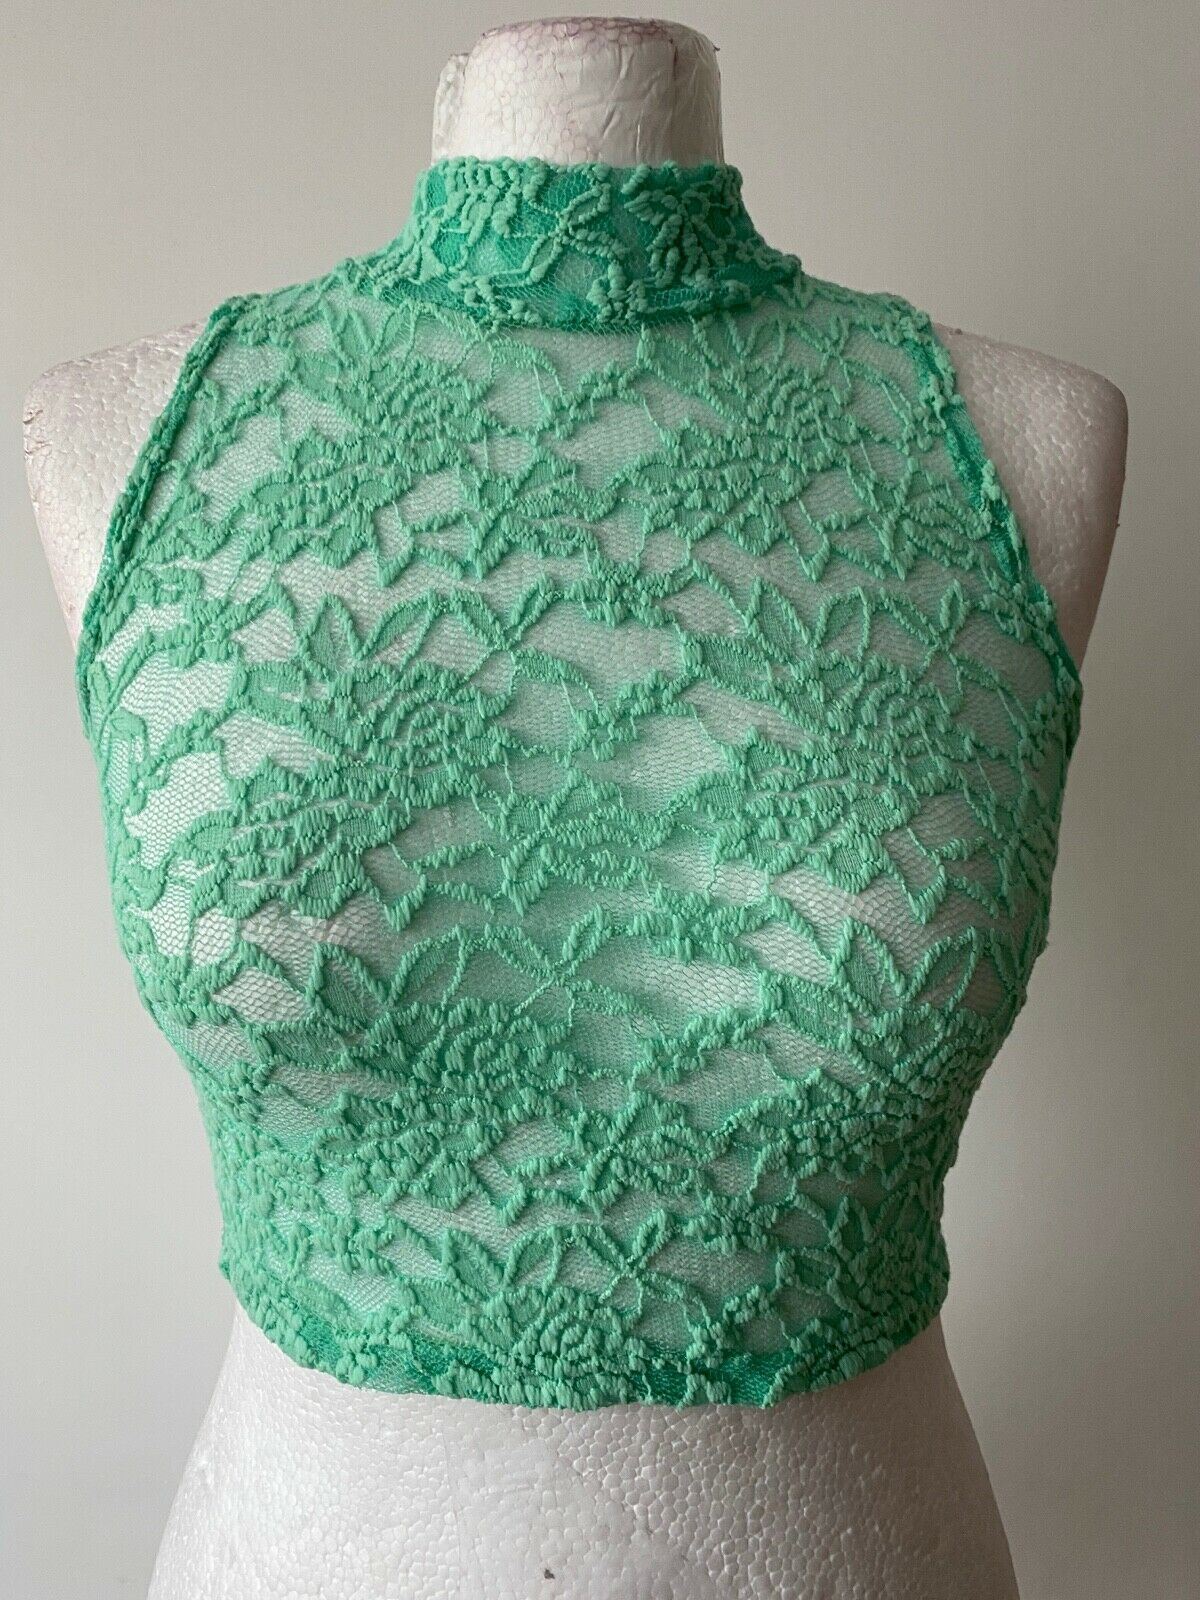 Boohoo Faith Lace Sleeveless Crop Top Green or Pink Sizes: 8, 10 & 12